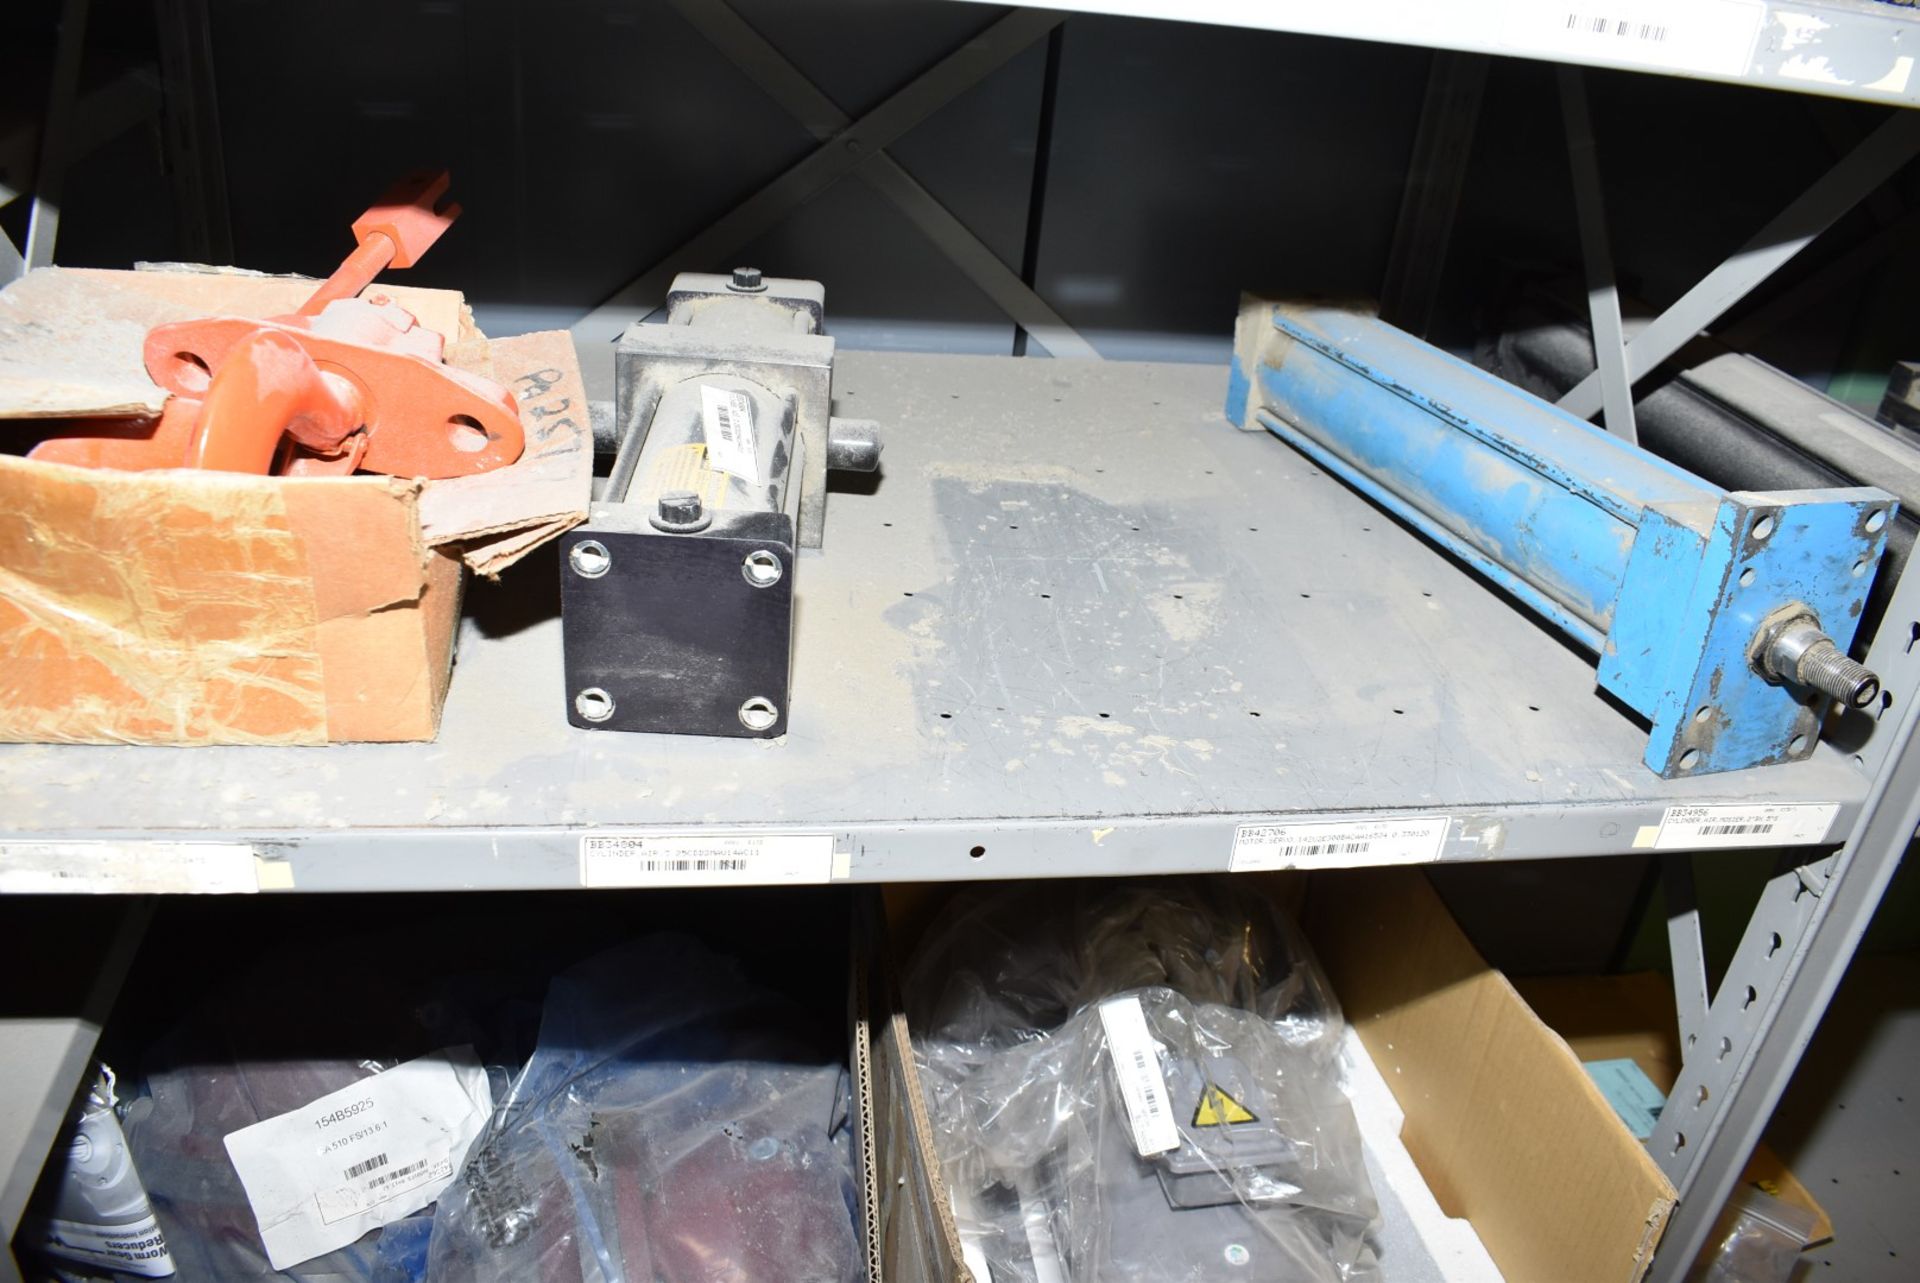 LOT/ CONTENTS OF SHELF - INCLUDING CONVEYOR ROLLERS, AIR CYLINDERS, VACUUM PUMP, SPARE PARTS [ - Bild 4 aus 5